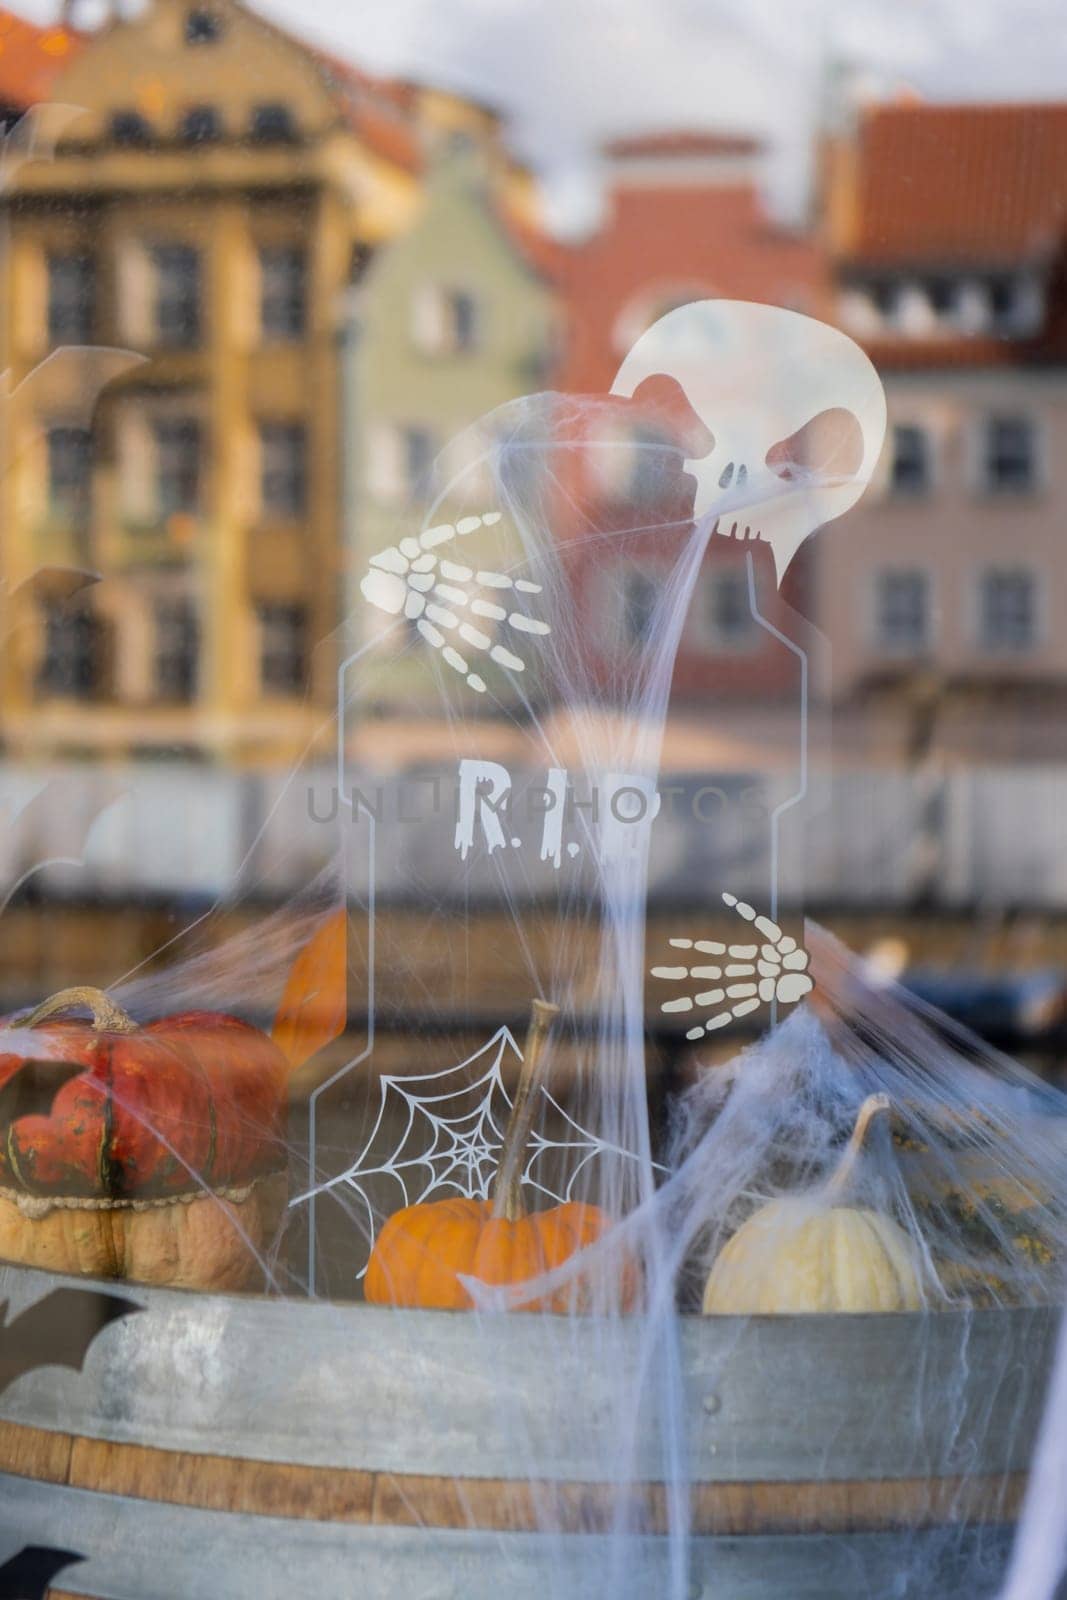 Halloween decorated outdoor cafe or restaurant terrace in America or Europe with pumpkins and Skeletons skull with tombstones RIP sign traditional attributes of Halloween. Frontyard decoration for party.